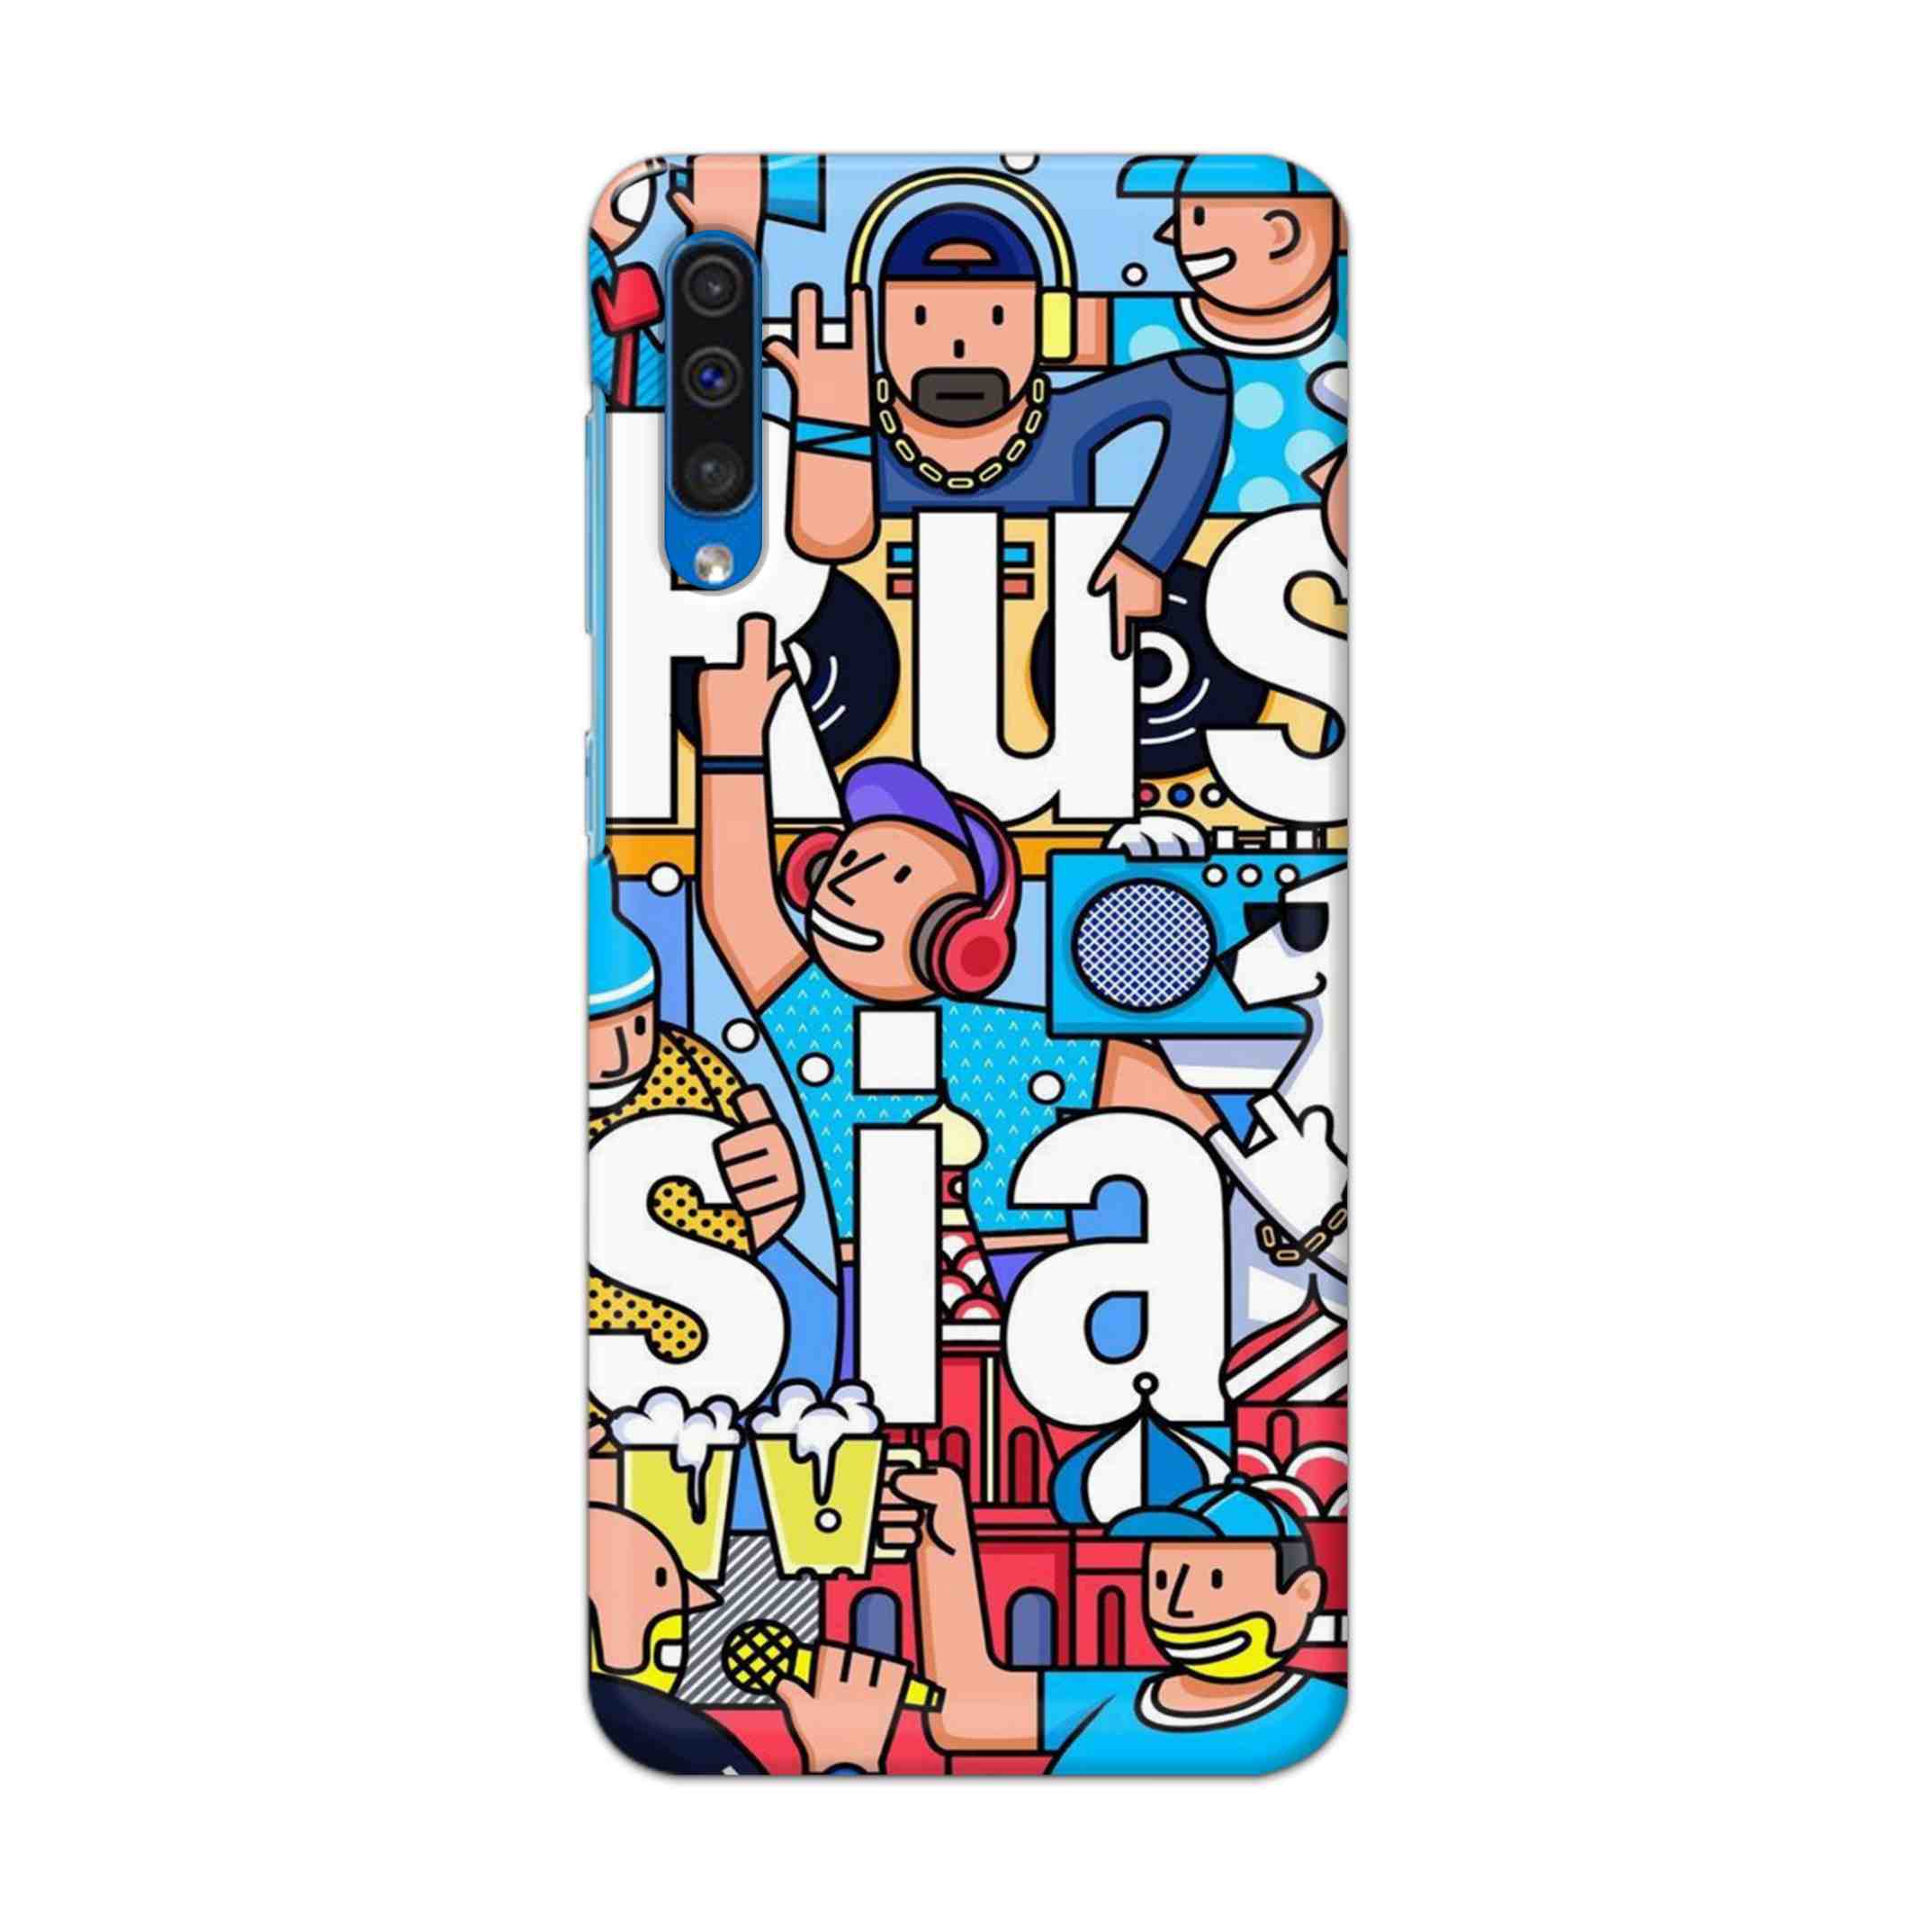 Buy Russia Hard Back Mobile Phone Case Cover For Samsung Galaxy A50 / A50s / A30s Online